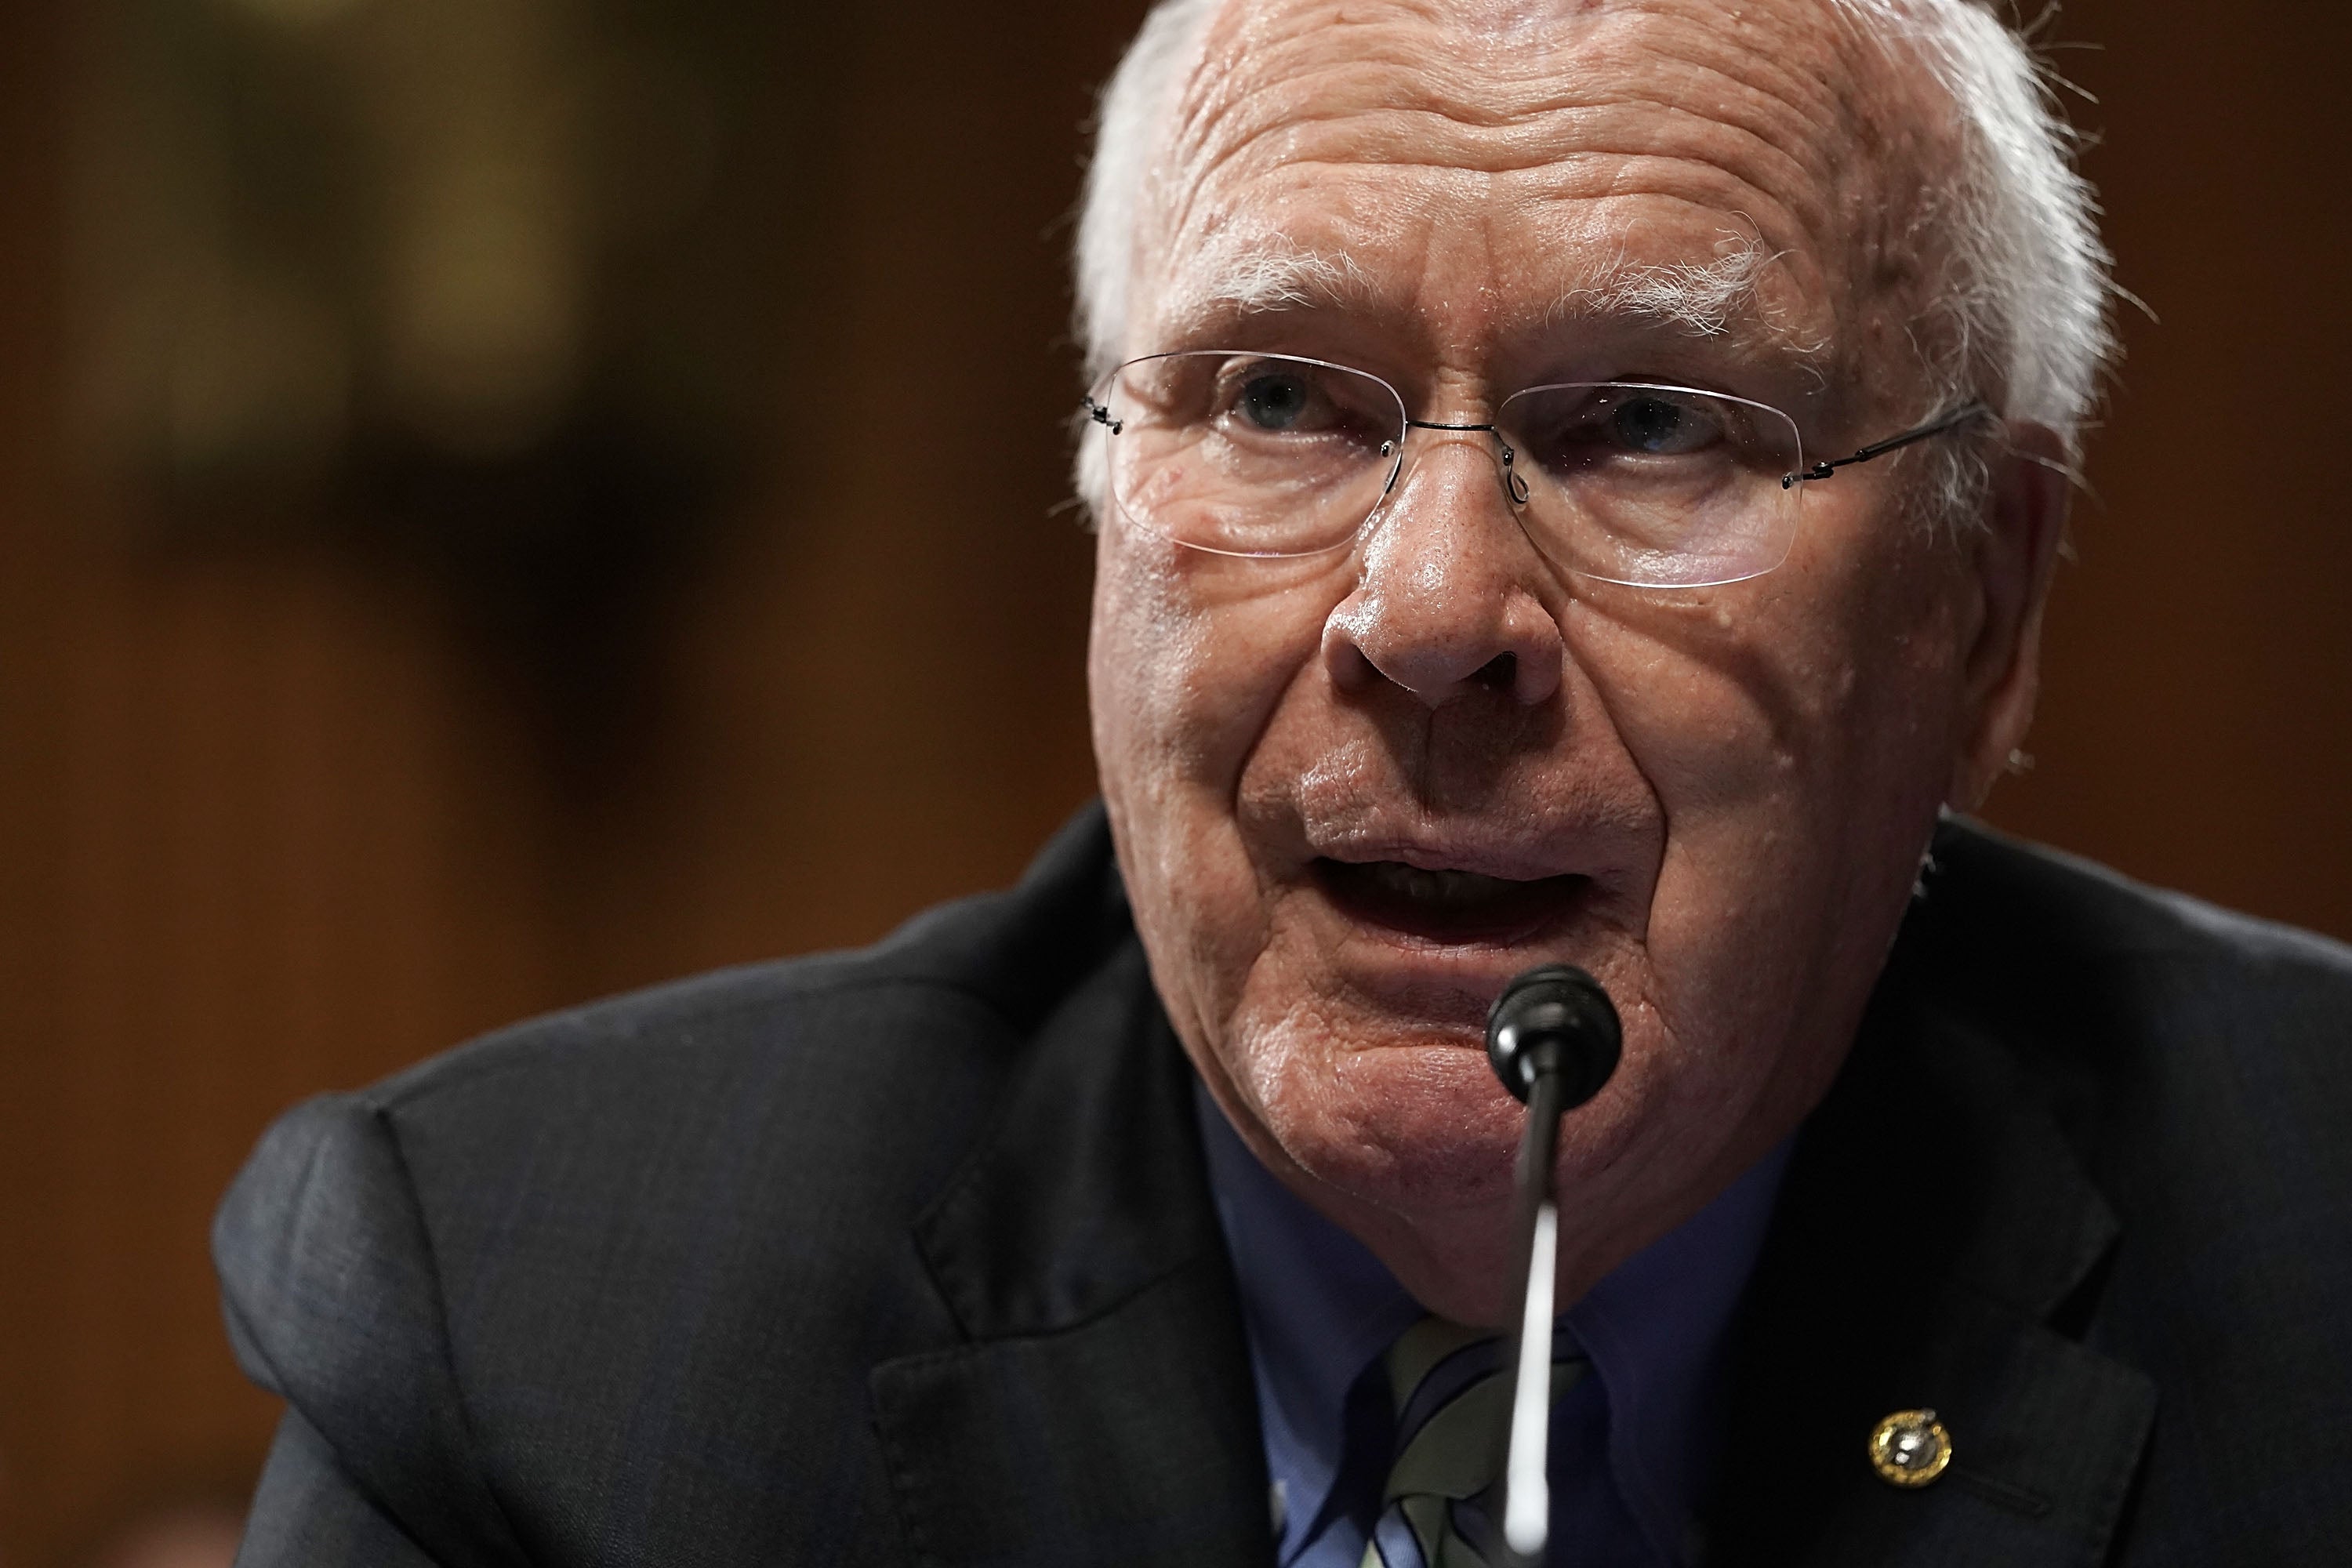 Patrick Leahy, a former senator, said the US was breaking its own law by sending aid to Israel